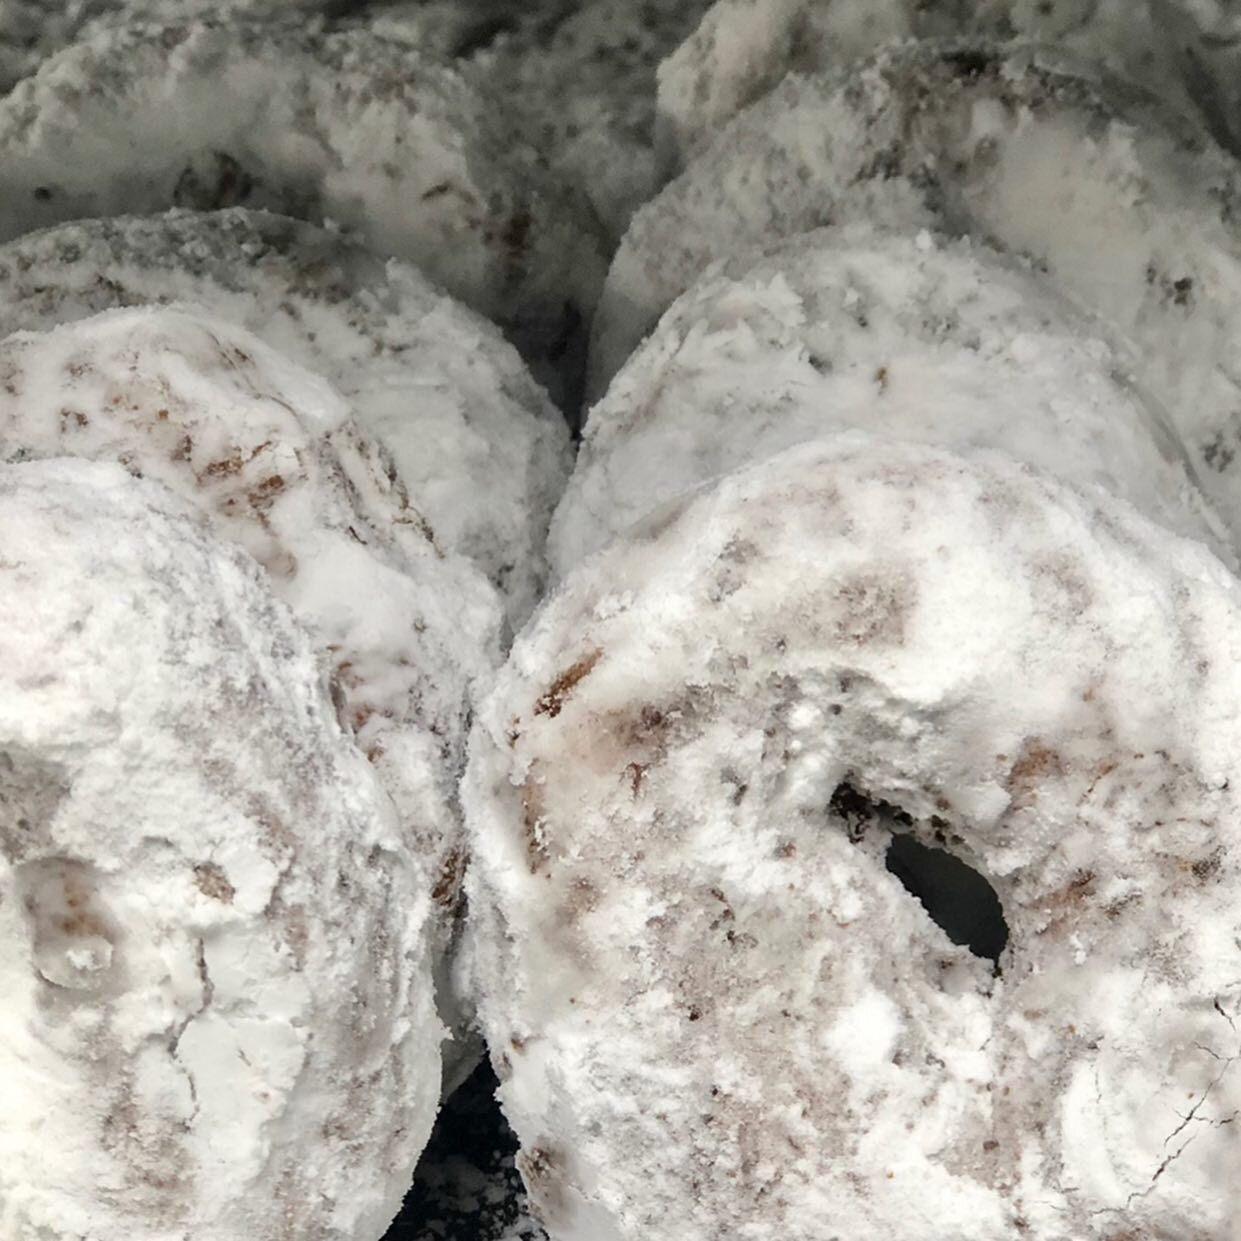 Happy National Donut Day everyone! 
Here are some of our powdered donuts we hand powder every morning. Stop by and grab your favorite! 🍎